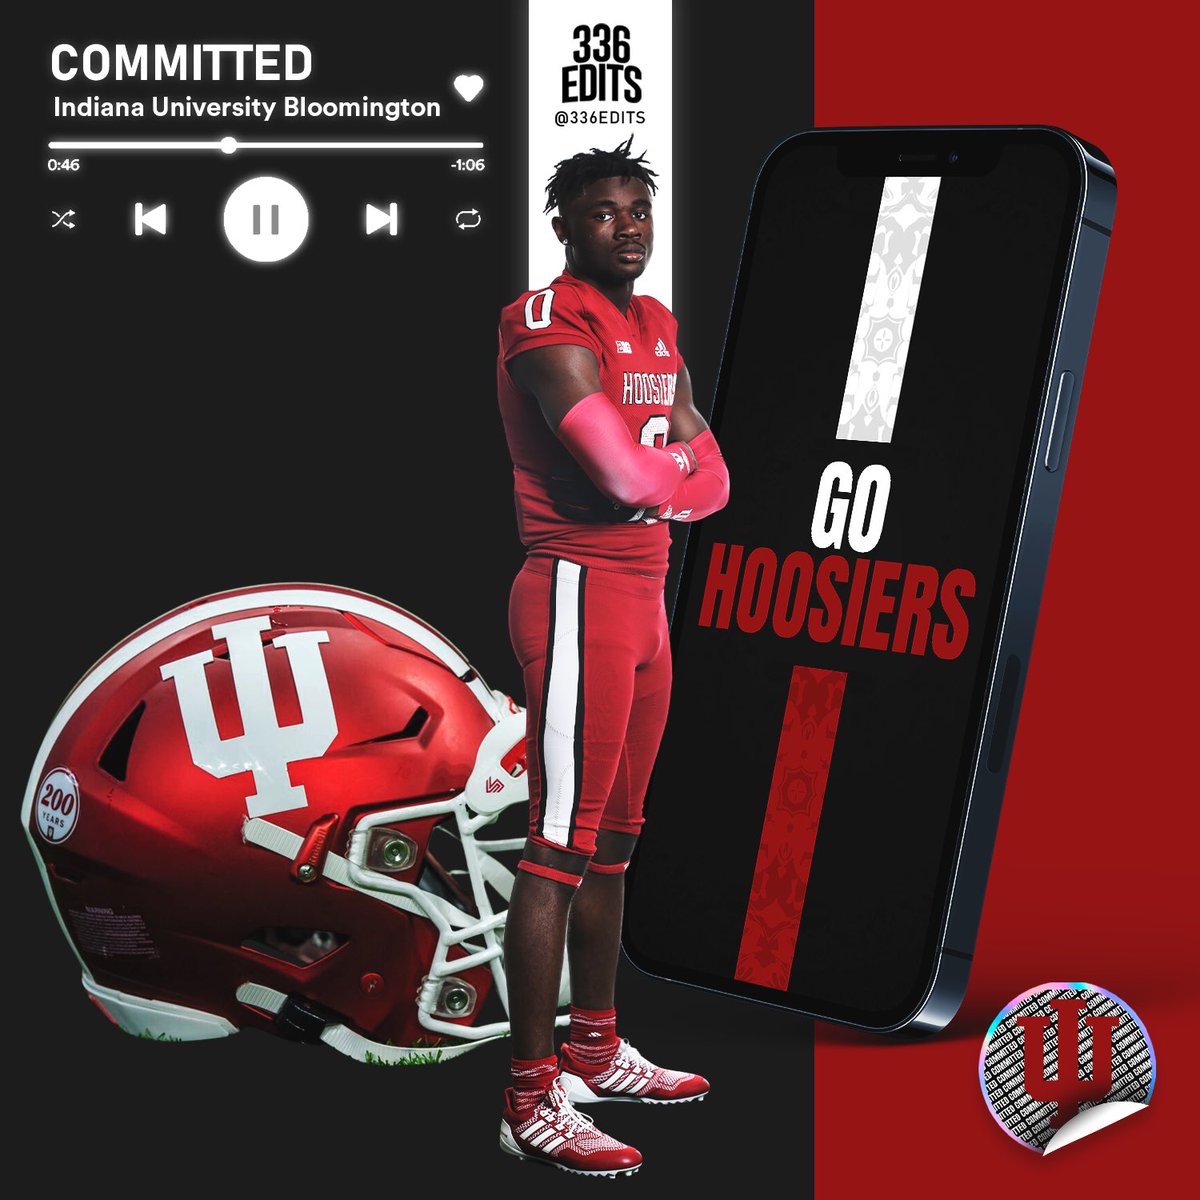 NEWS: 2024 three-star Shamar Meikle has committed to Indiana. The 6-foot-5, 205-pound defensive end chose the Hoosiers over Toledo and Coastal Carolina.